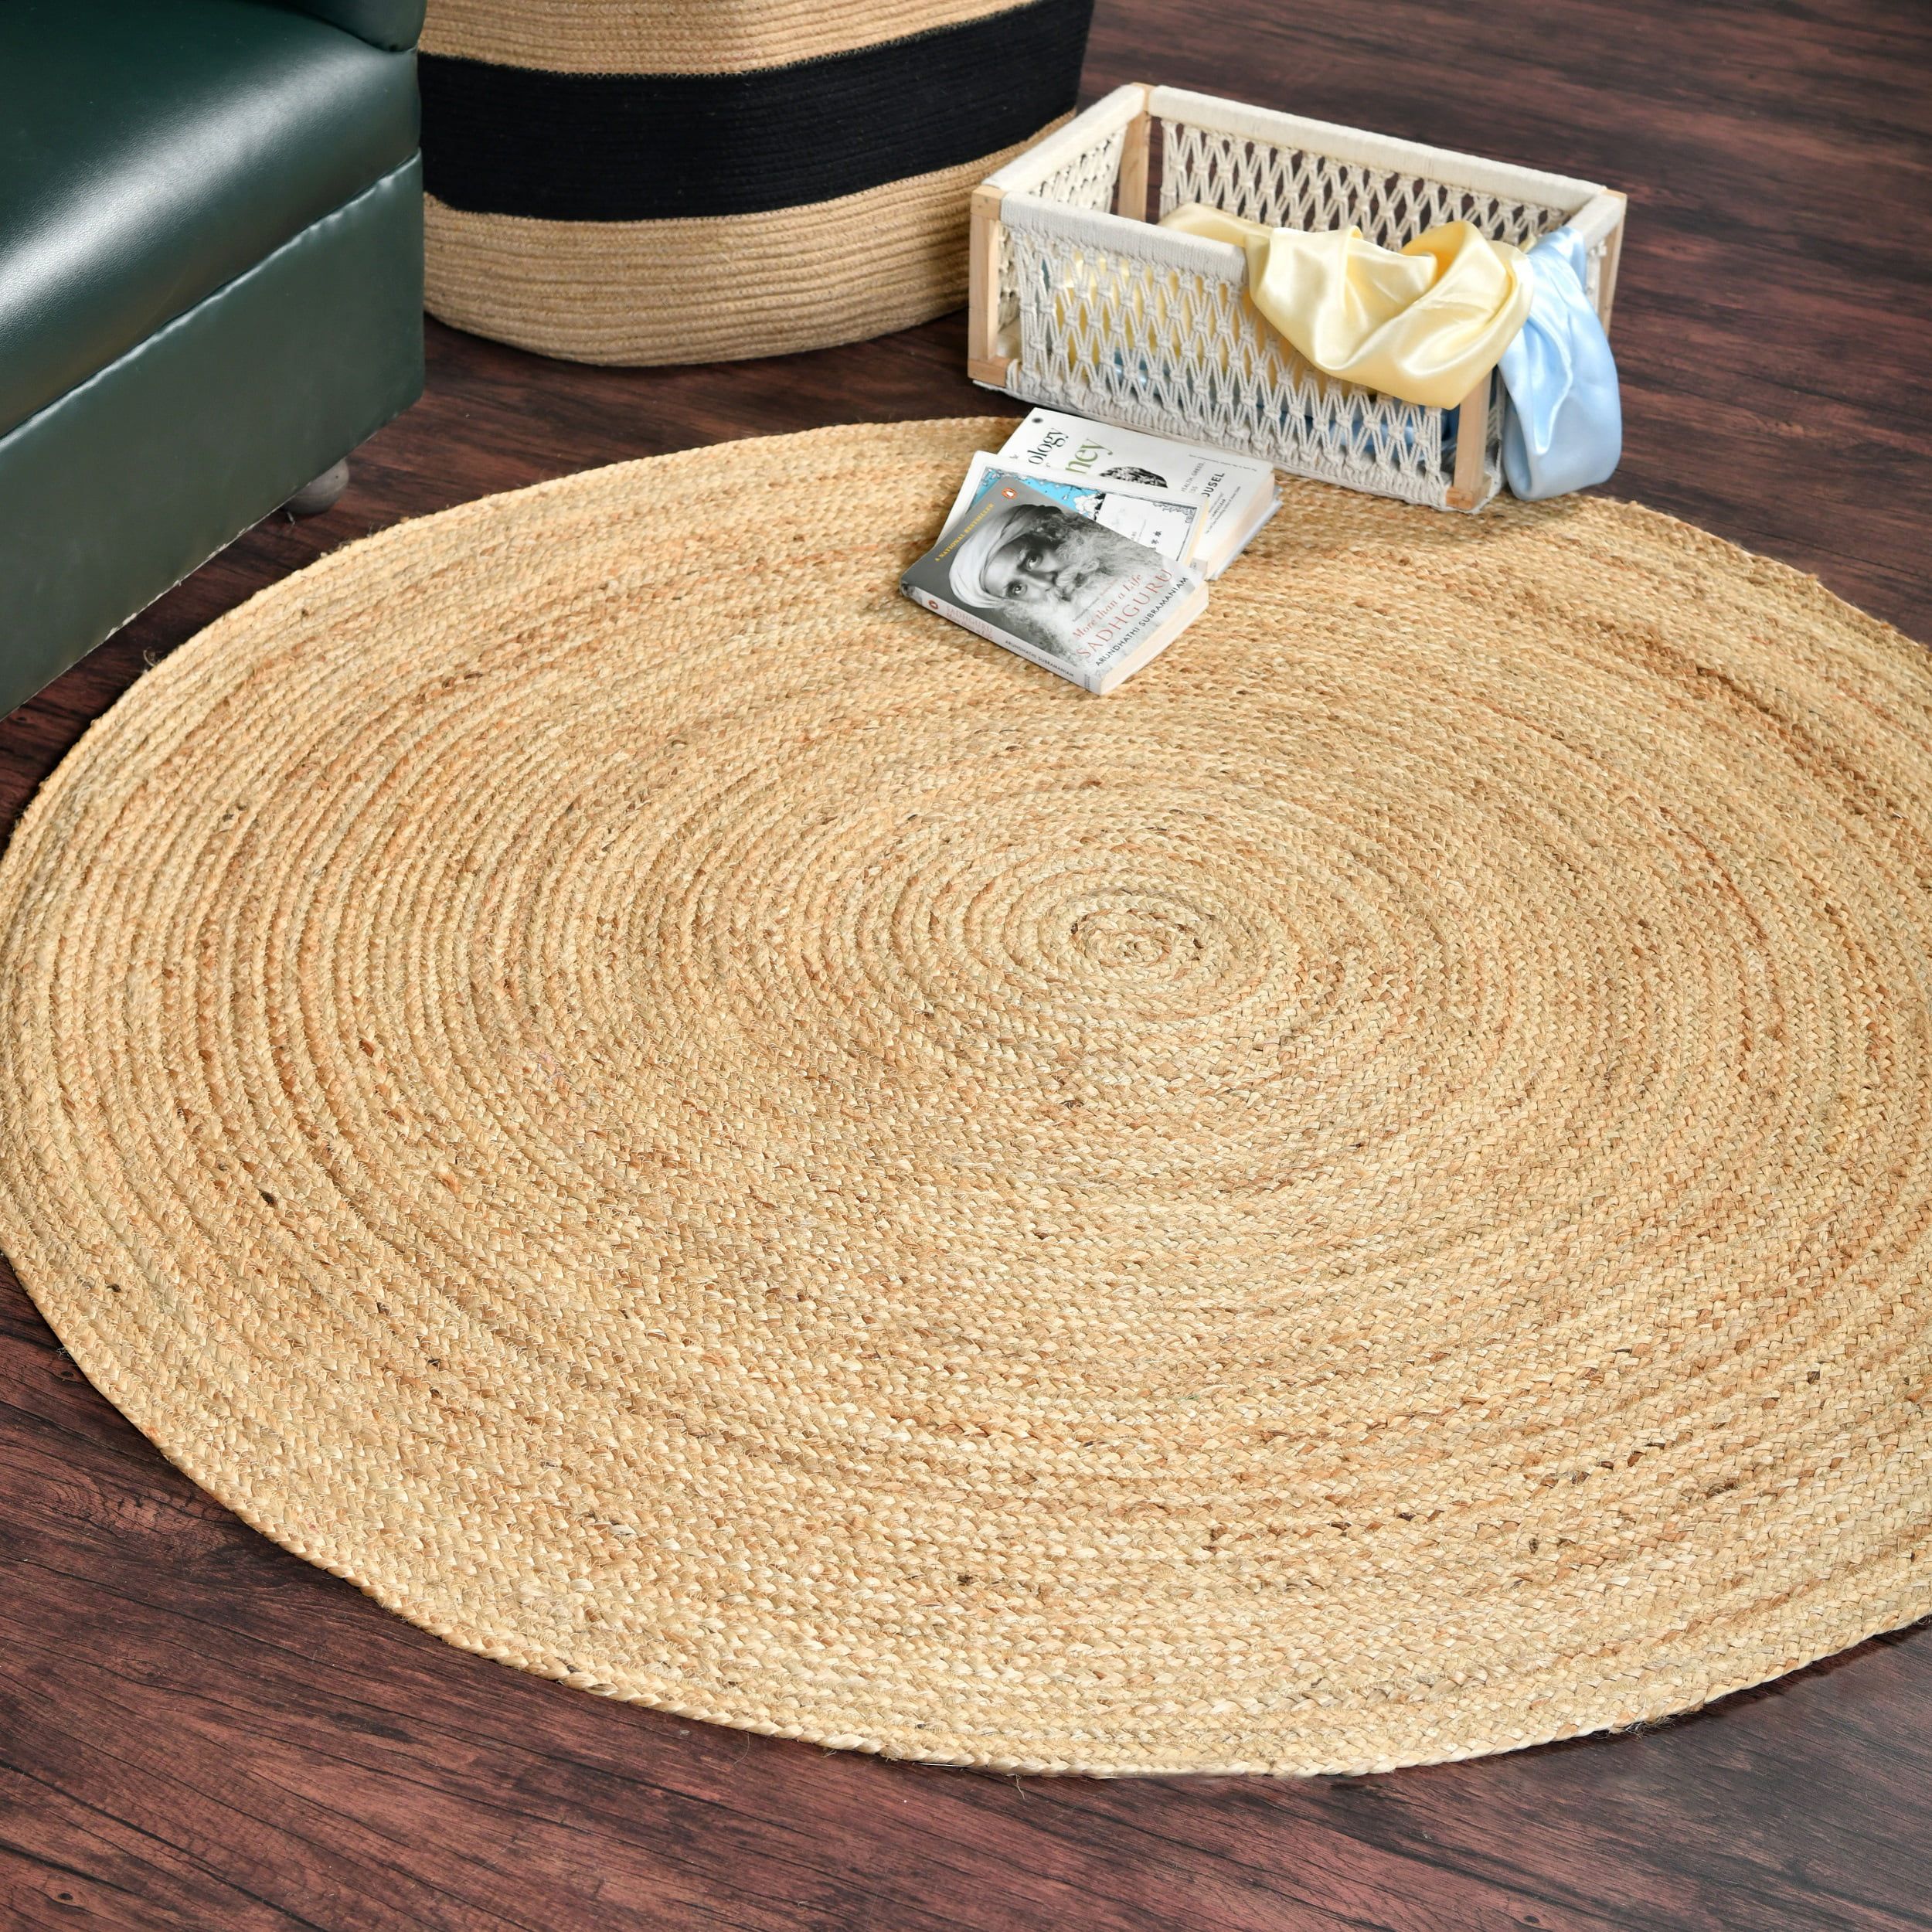 Homemonde Hand Woven Braided Jute Area Rug 6 Ft Round Natural Reversible  Rugs For Kitchen Living Room Entryway – Walmart Inside Hand Woven Braided Rugs (View 2 of 15)